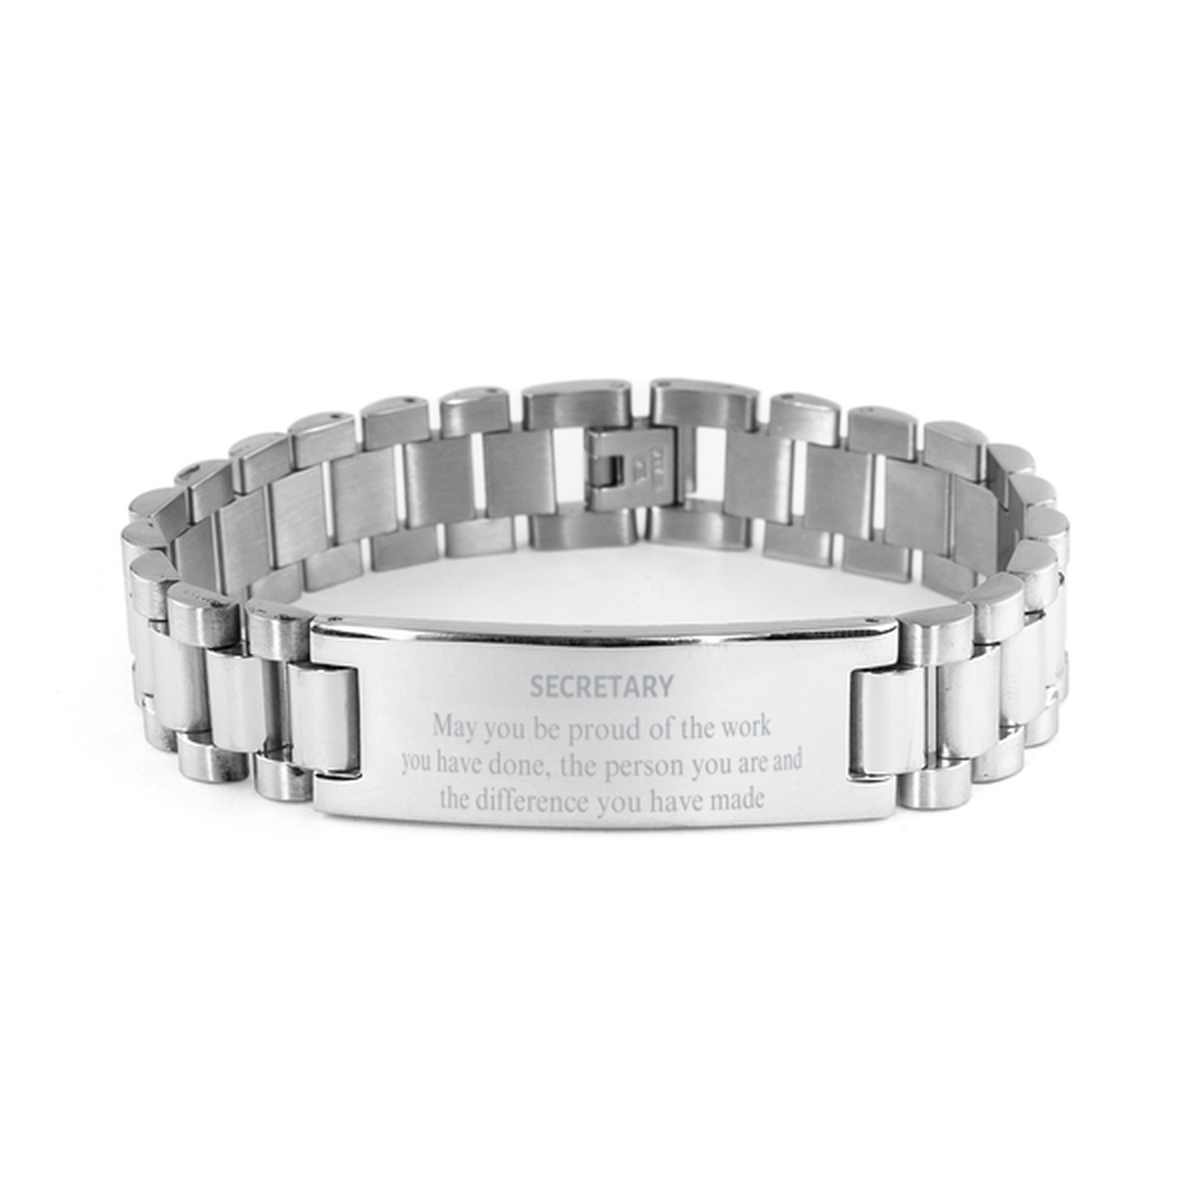 Secretary May you be proud of the work you have done, Retirement Secretary Ladder Stainless Steel Bracelet for Colleague Appreciation Gifts Amazing for Secretary